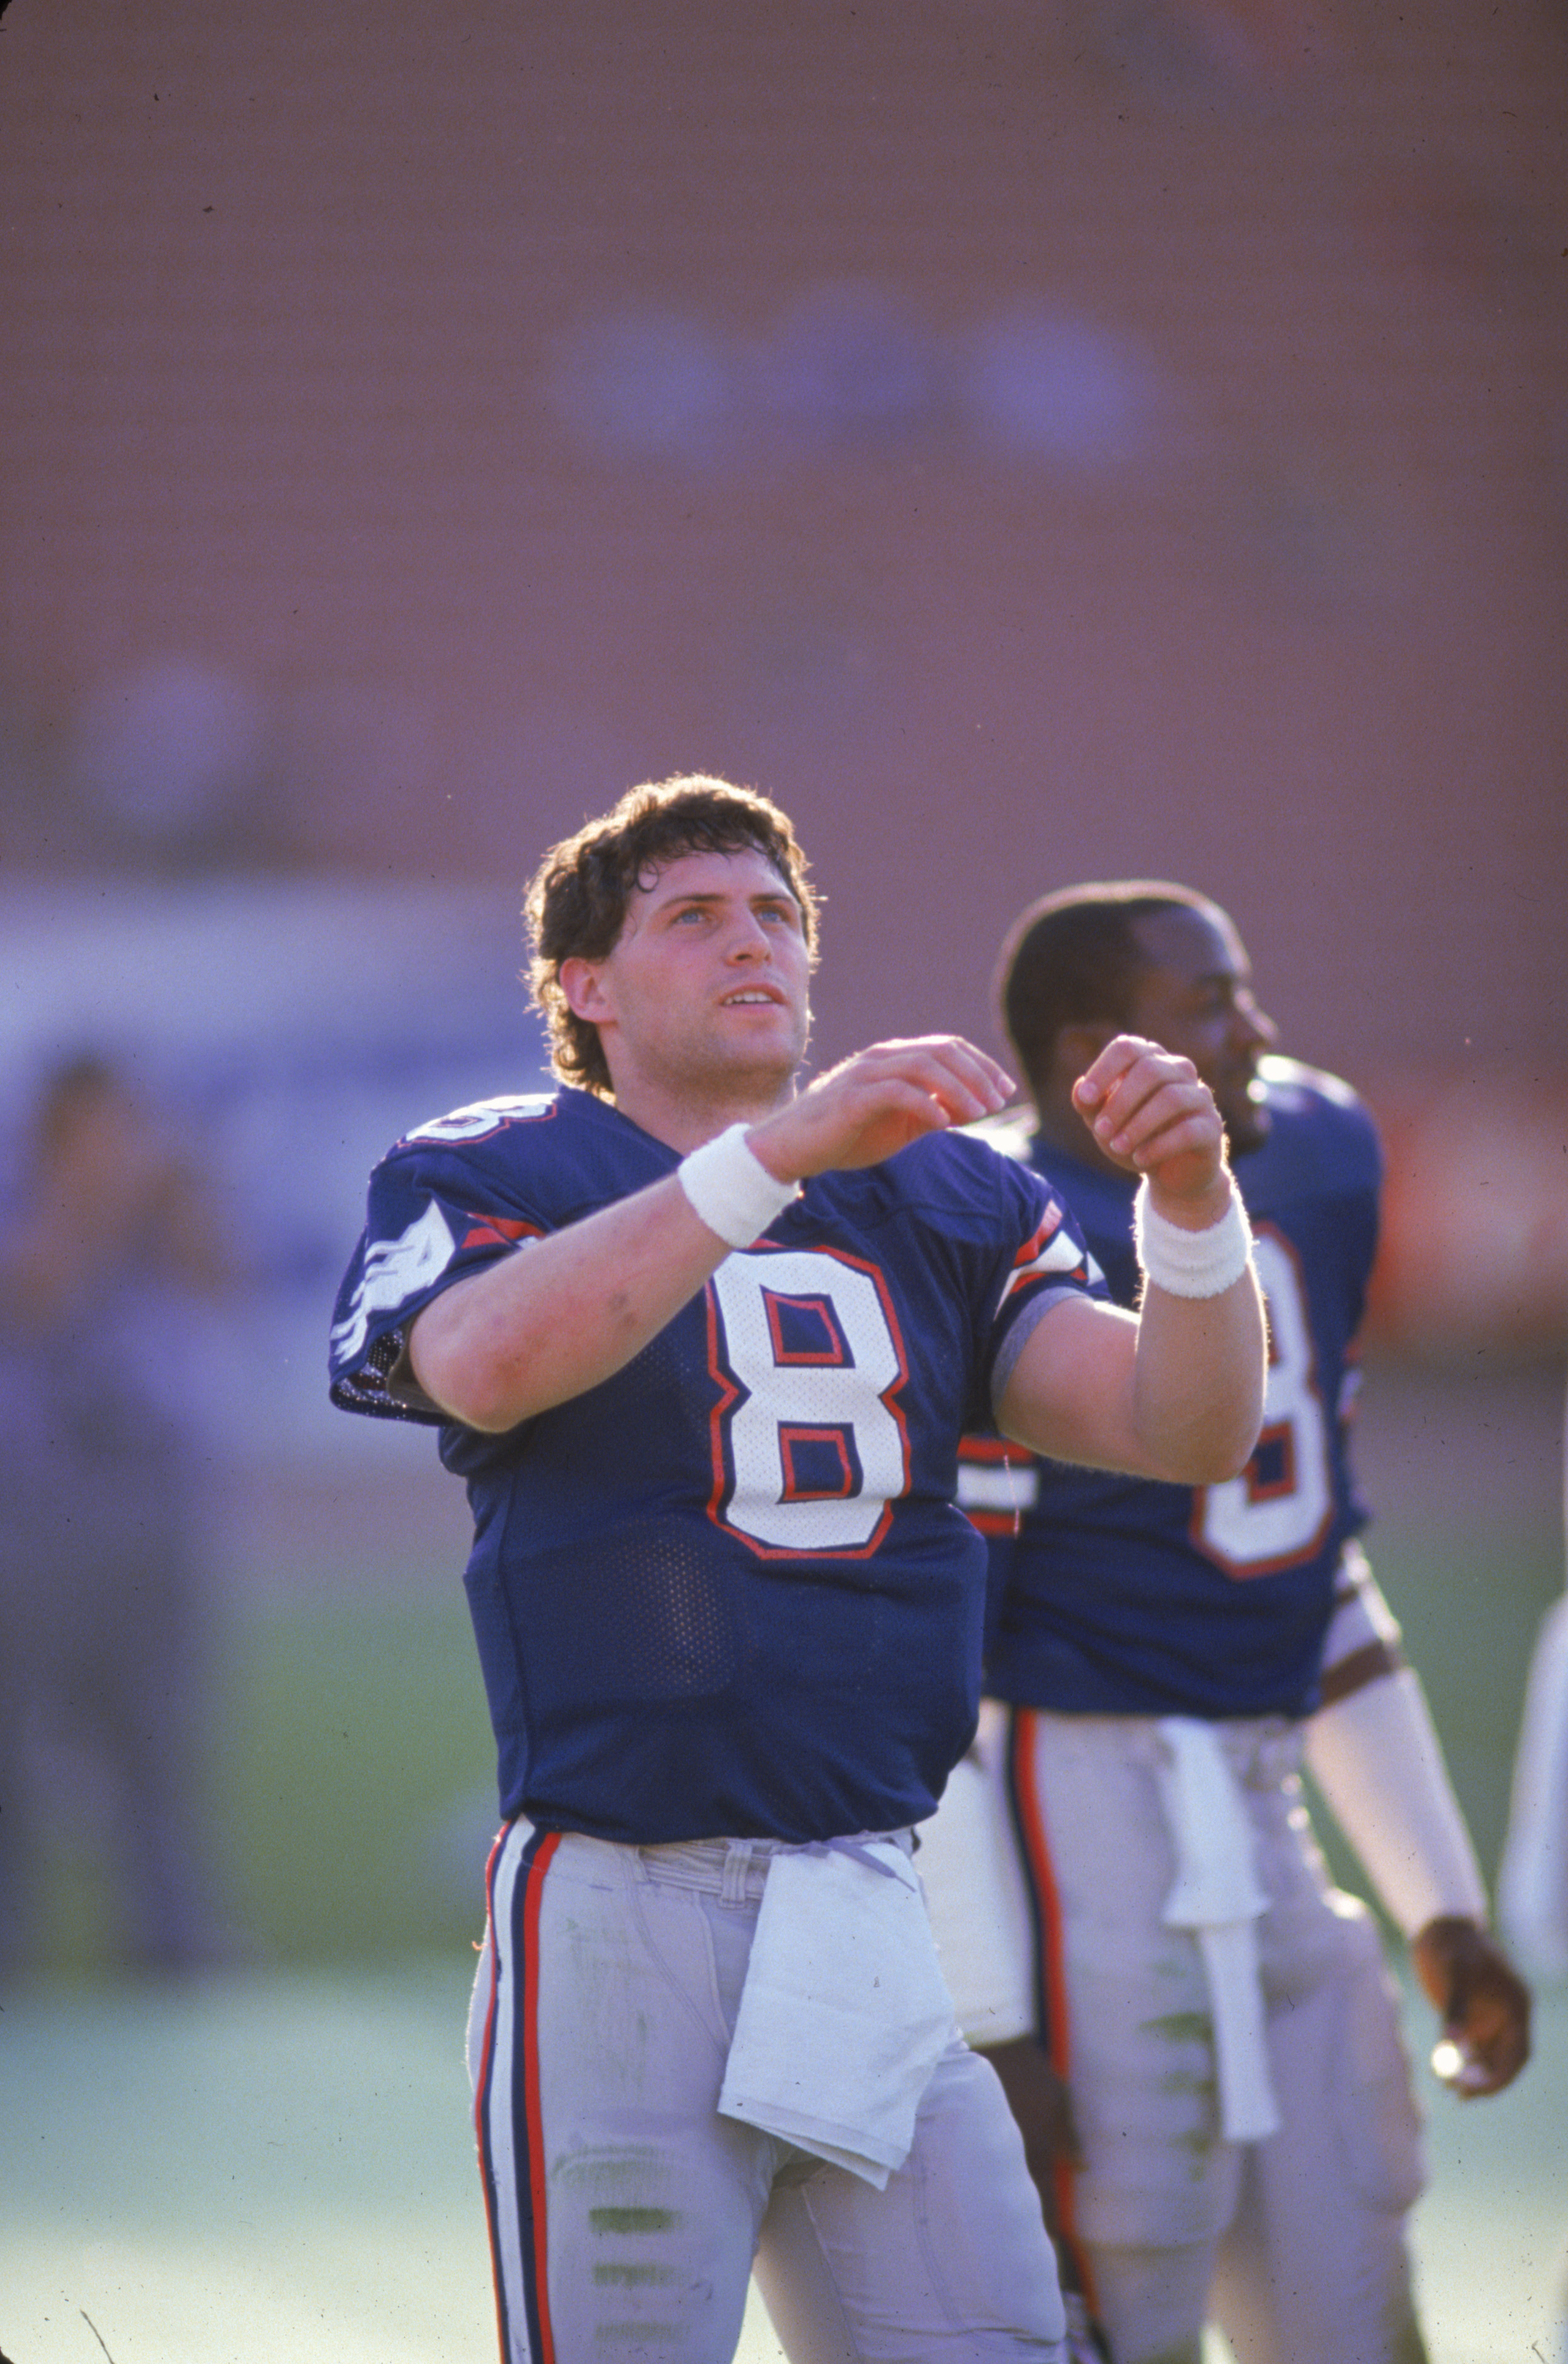 1985:  Quarterback Steve Young #8 of the USFL's Los Angeles Express warms up on the field prior to a 1985 season game. (Photo by Getty Images)